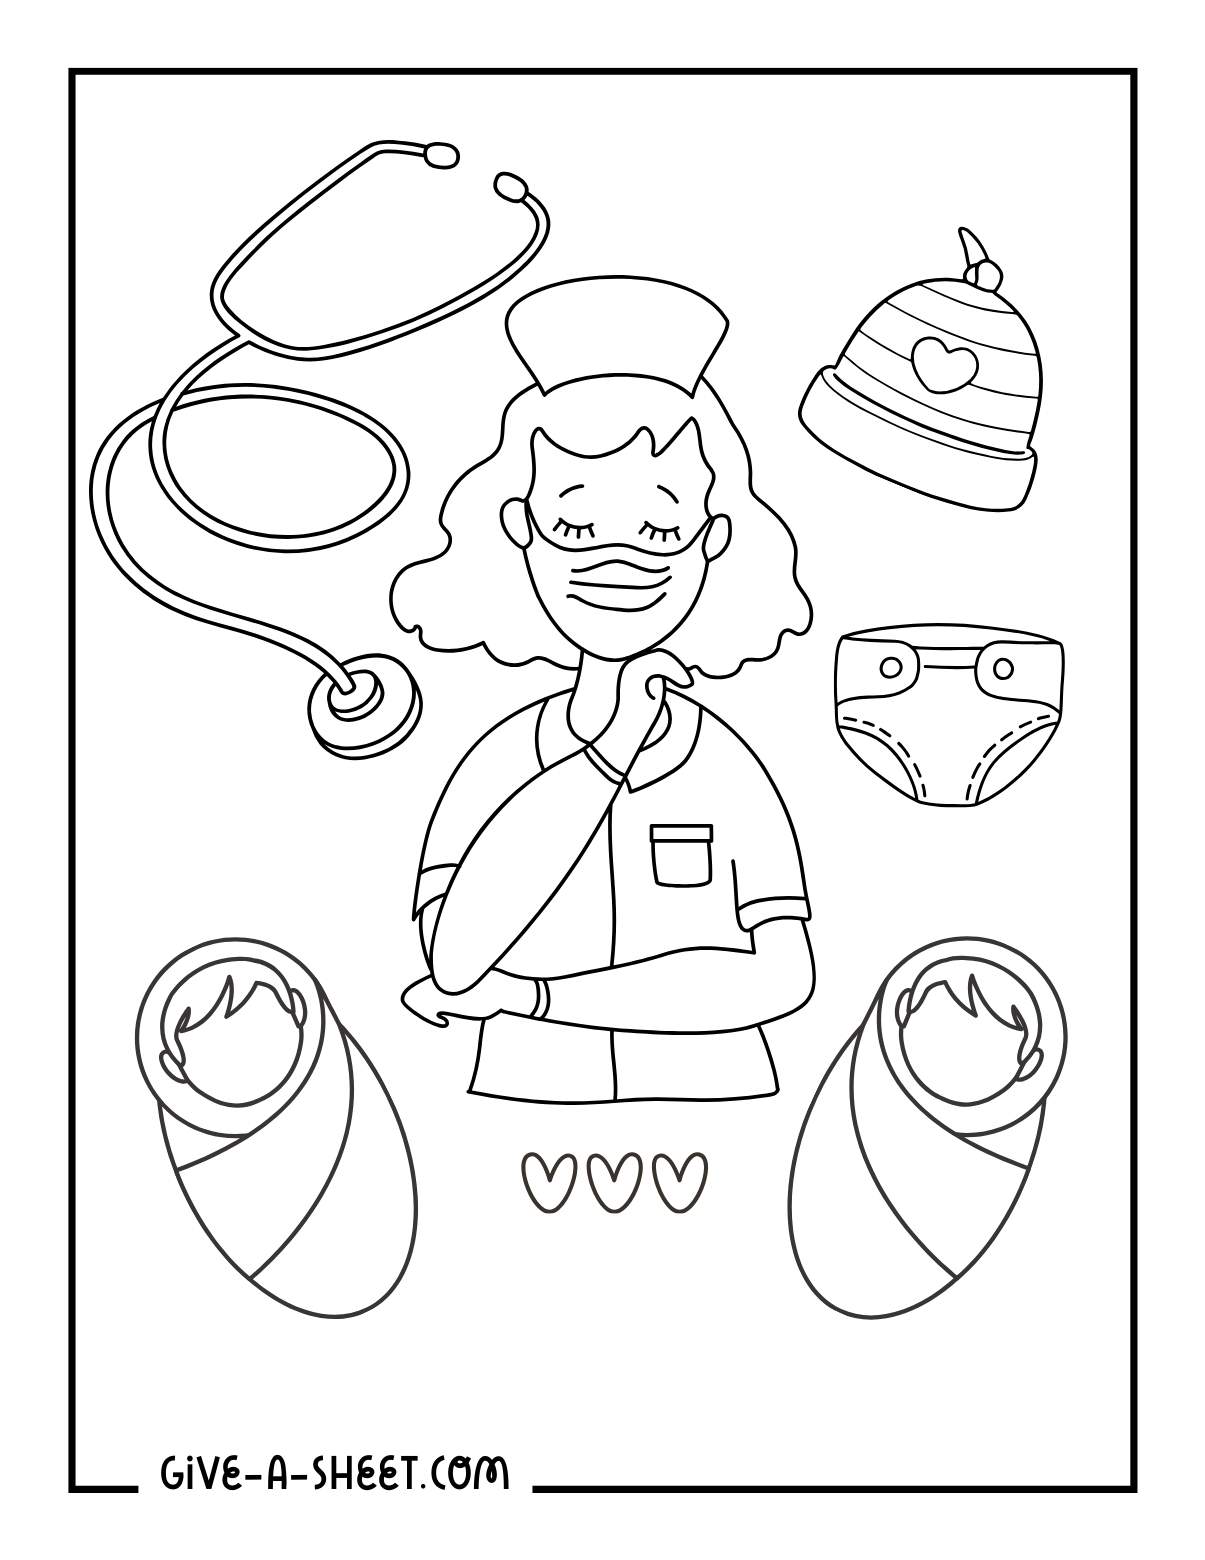 Midwife nurse coloring page for babies.